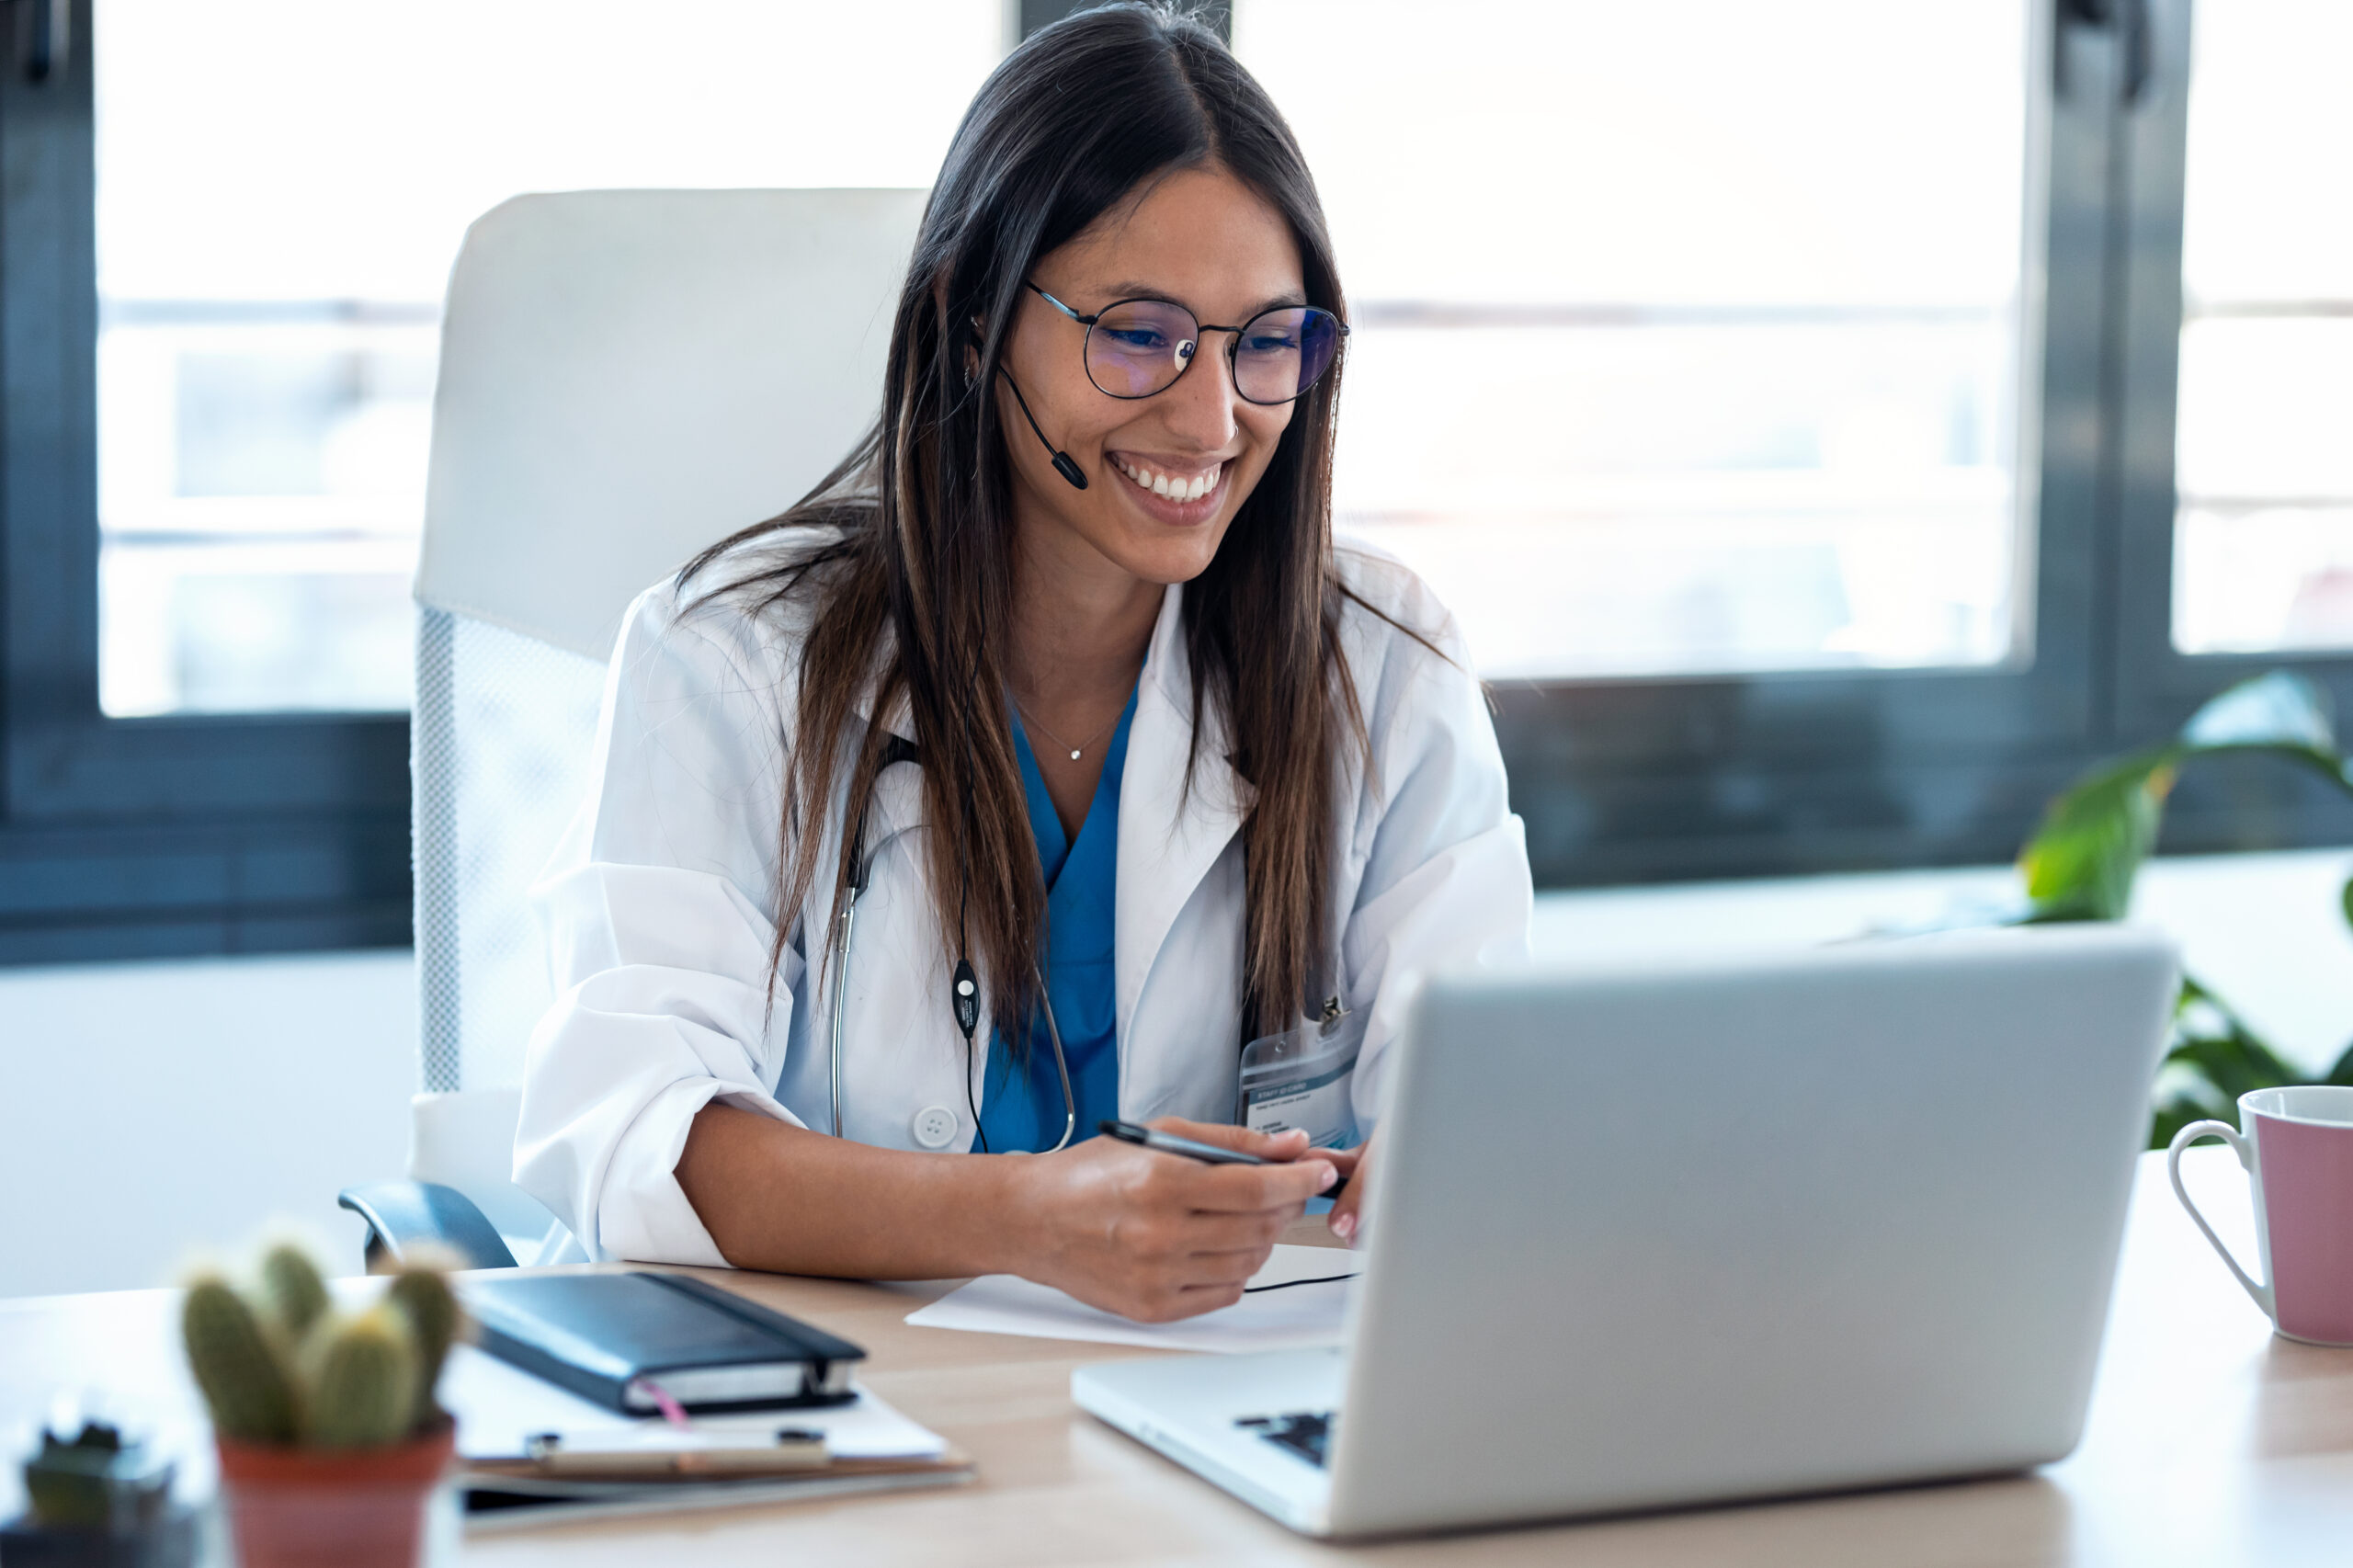 Smiling physician sitting in front of a laptop